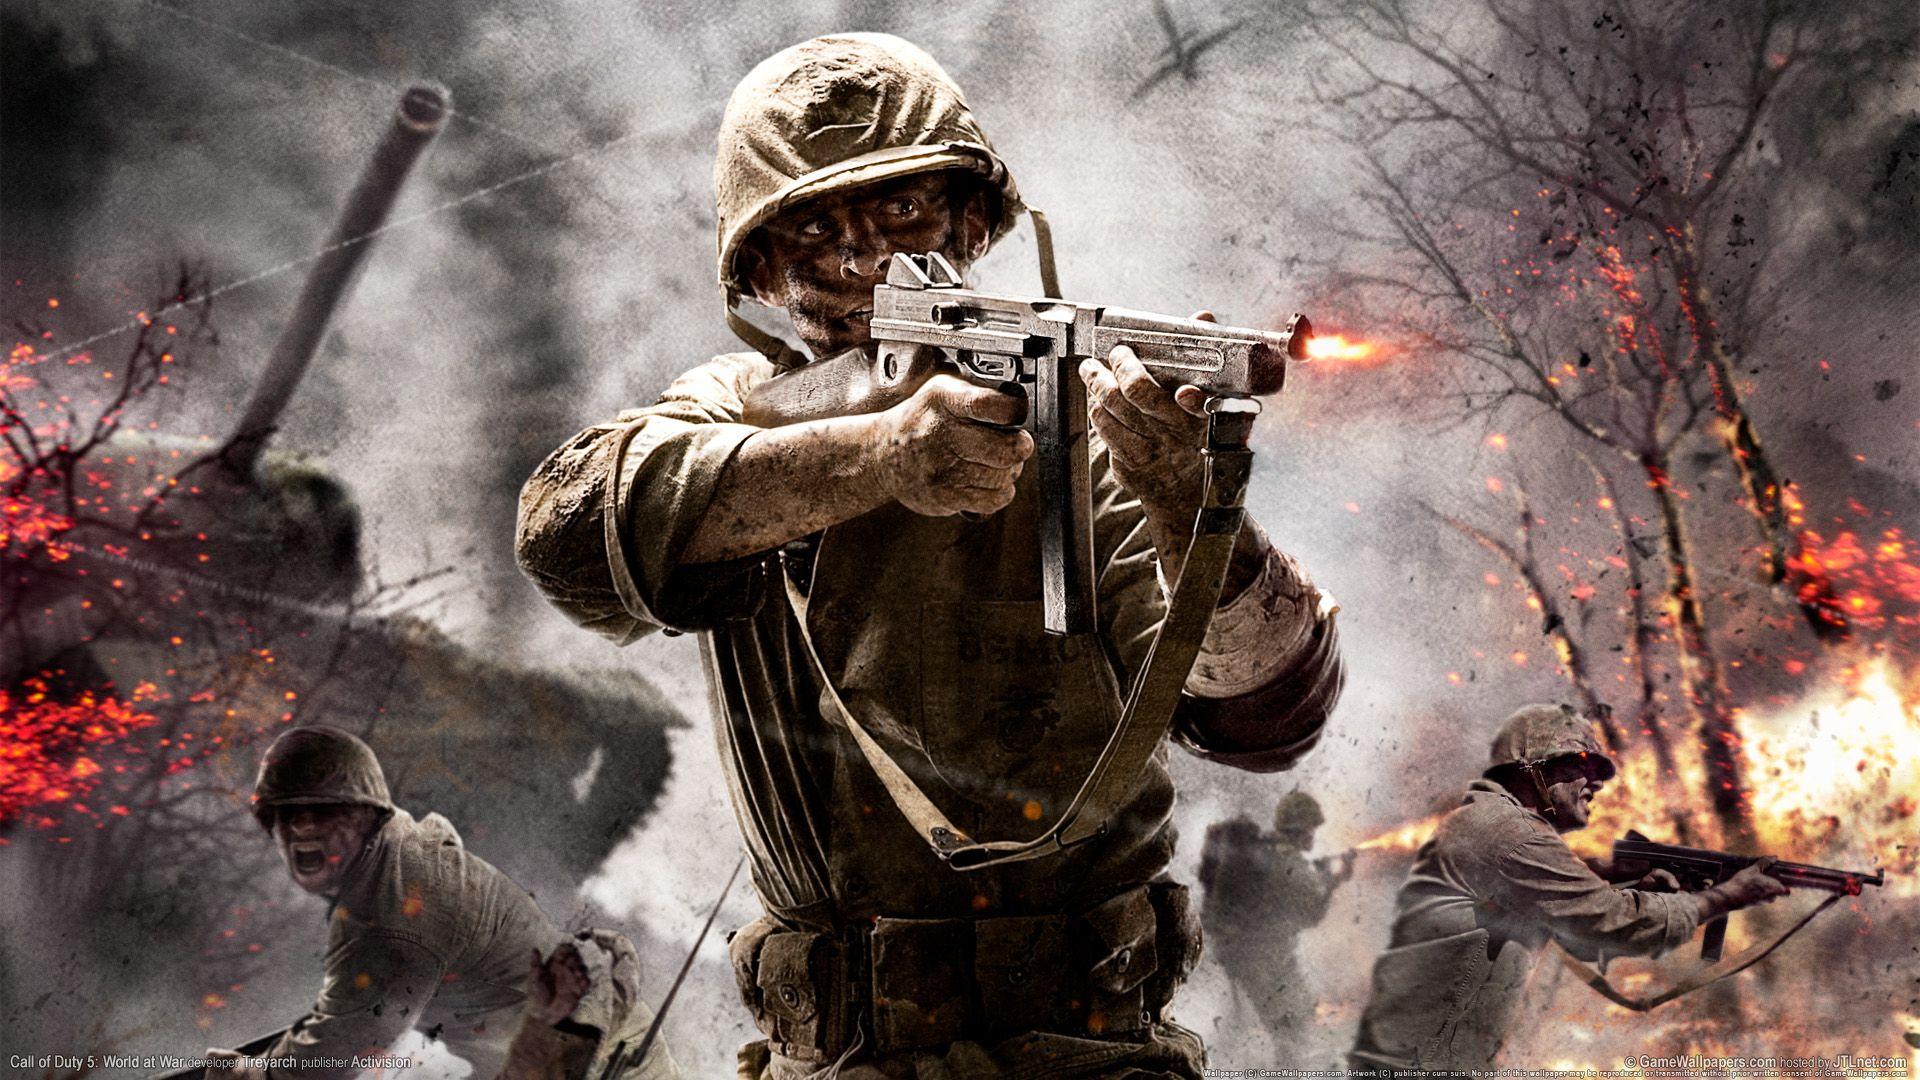 Call Of Duty Wallpaper for Free Download, 30 Call Of Duty FHDQ